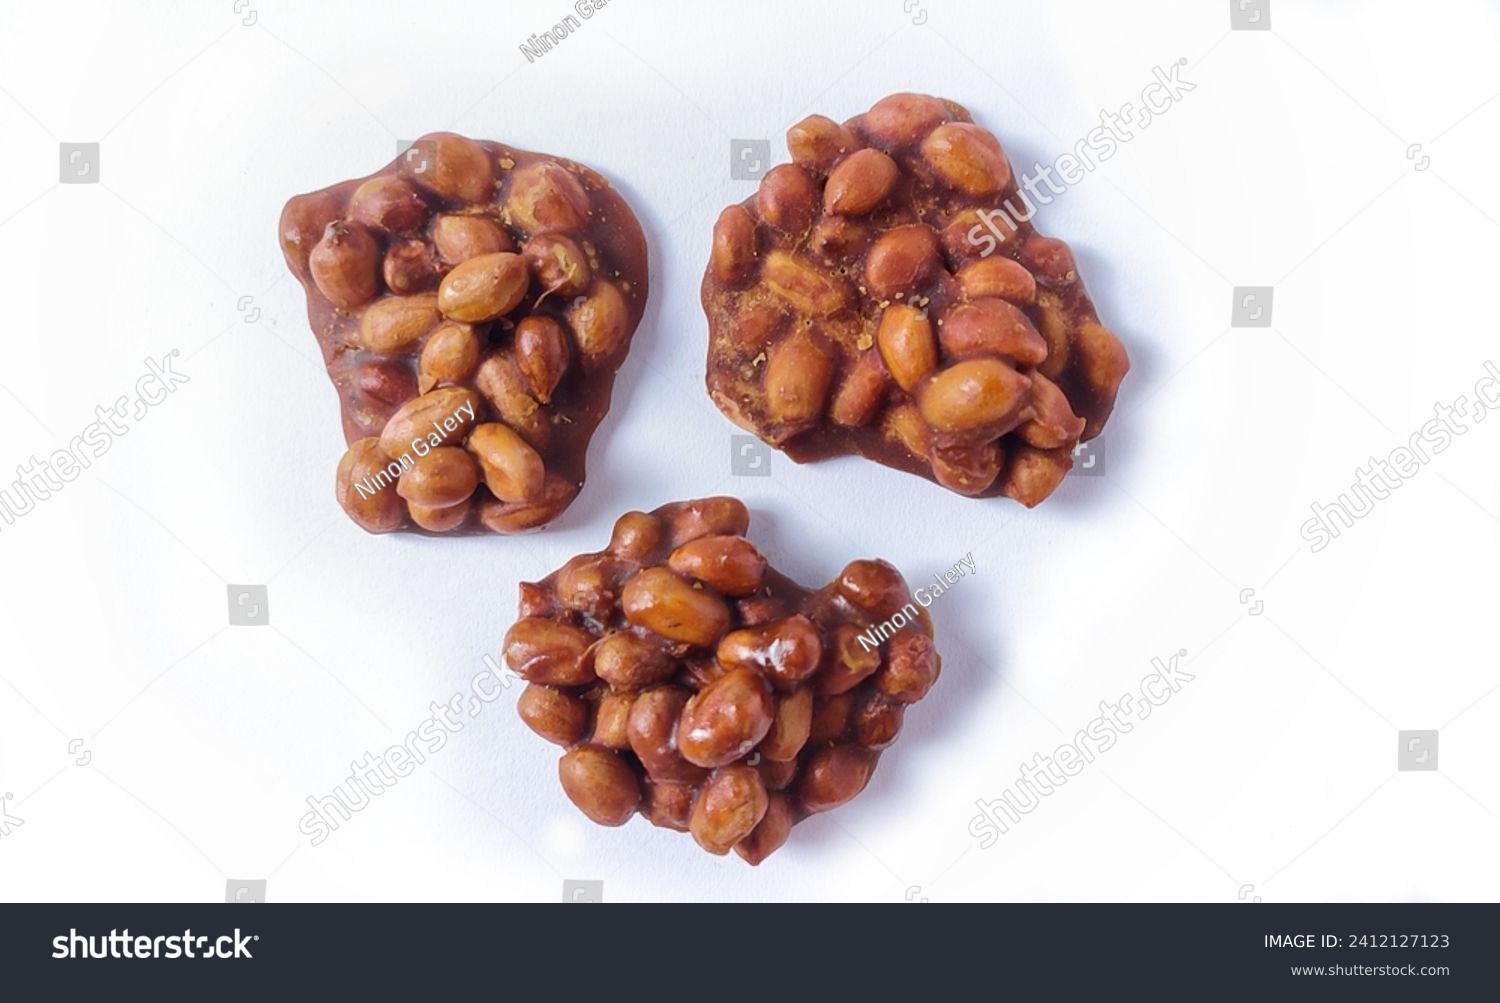 Top view of Ting-ting or Enting-enting or Ampyang isolated on white background. Traditional Indonesian sweet snack made from peanuts mixed with brown sugar. Clipping path.  #2412127123